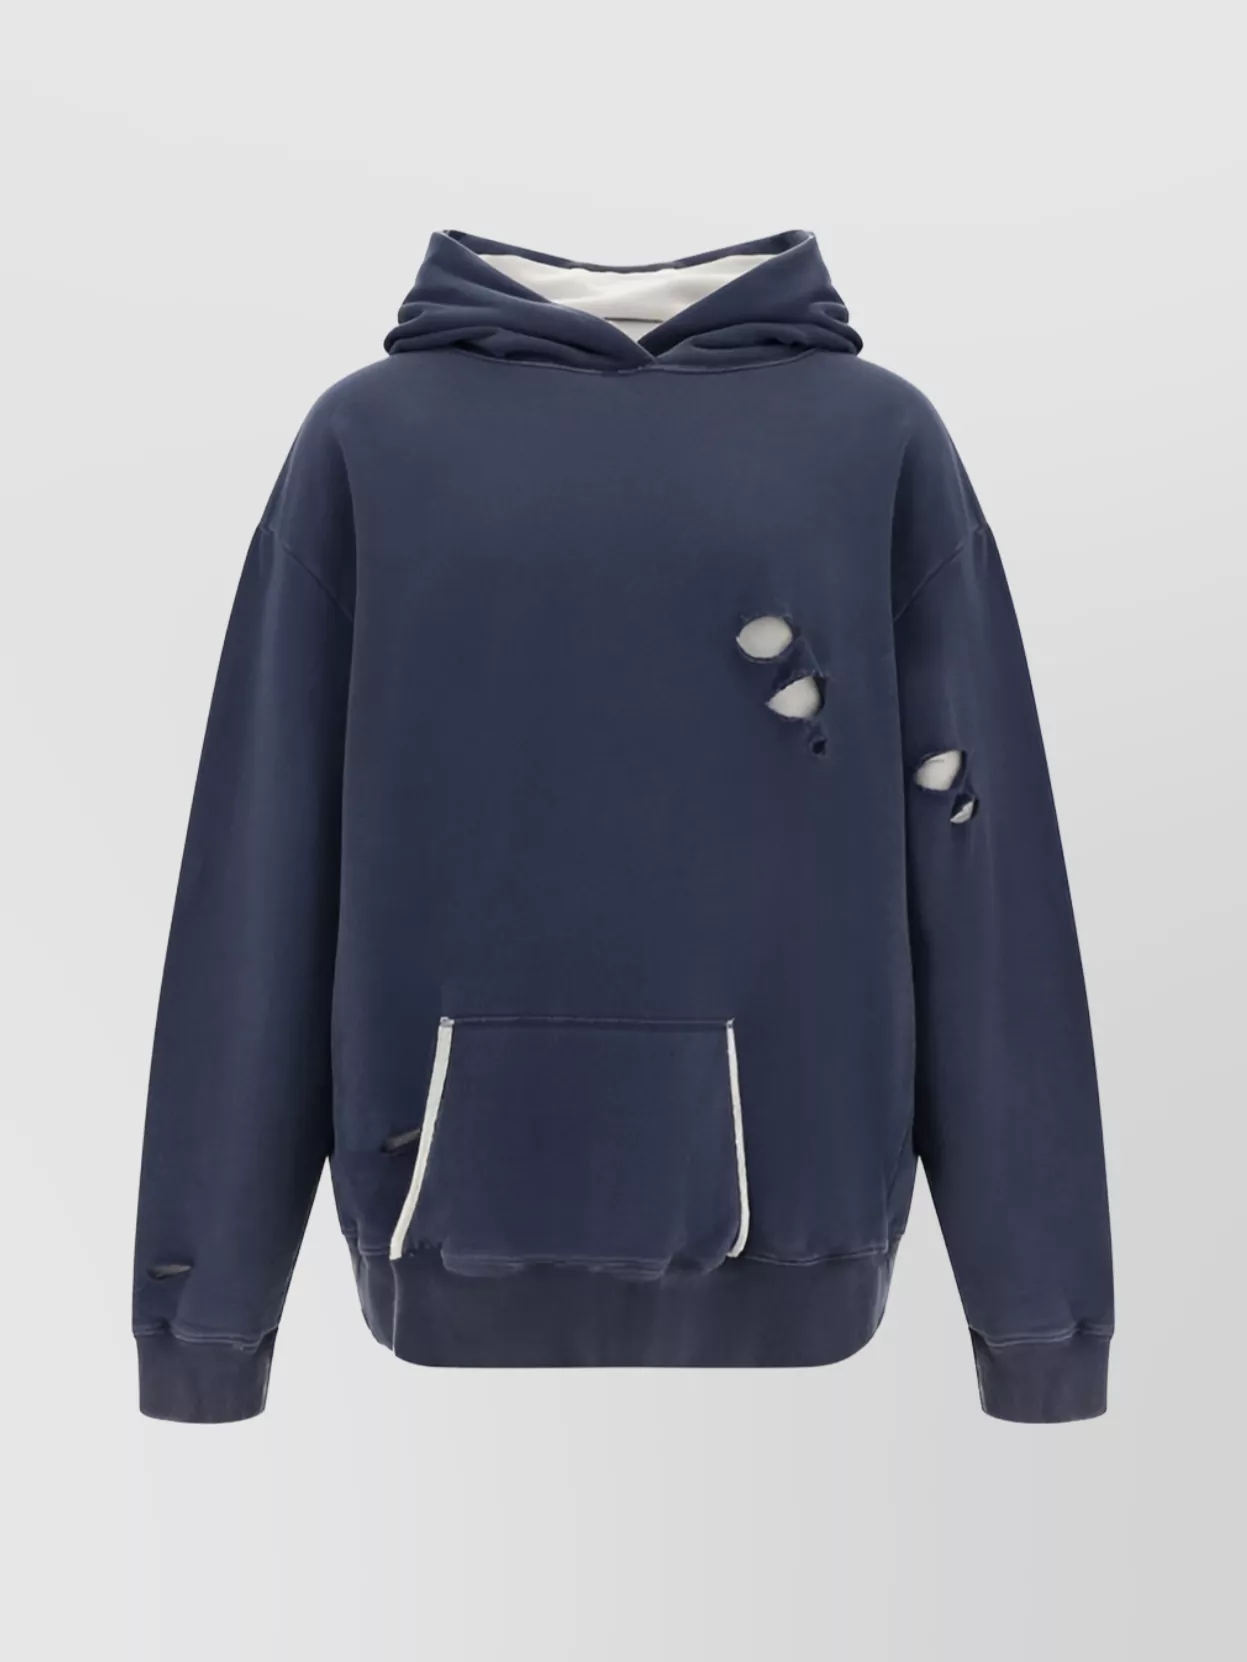 Maison Margiela Distressed Cotton Hoodie Double Layer In Blue